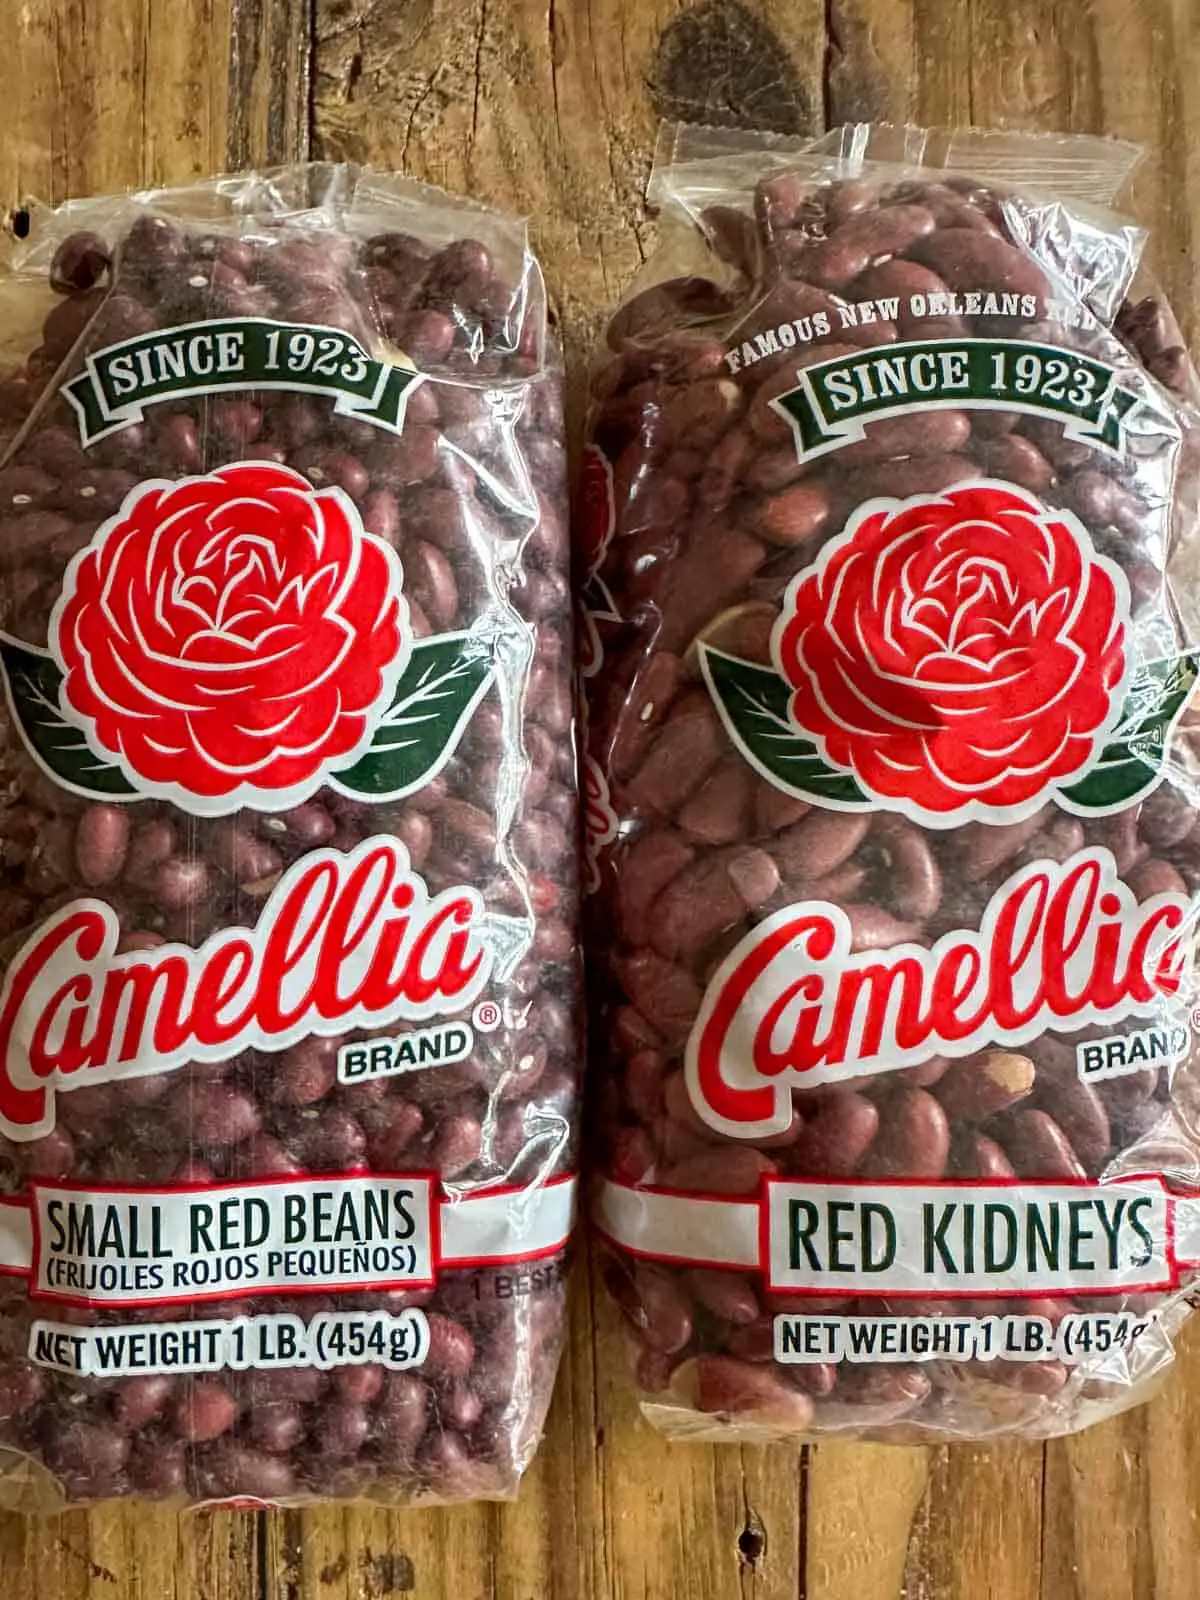 A package of Camellia Small Red Beans next to a package of Camellia Red Kidney beans.